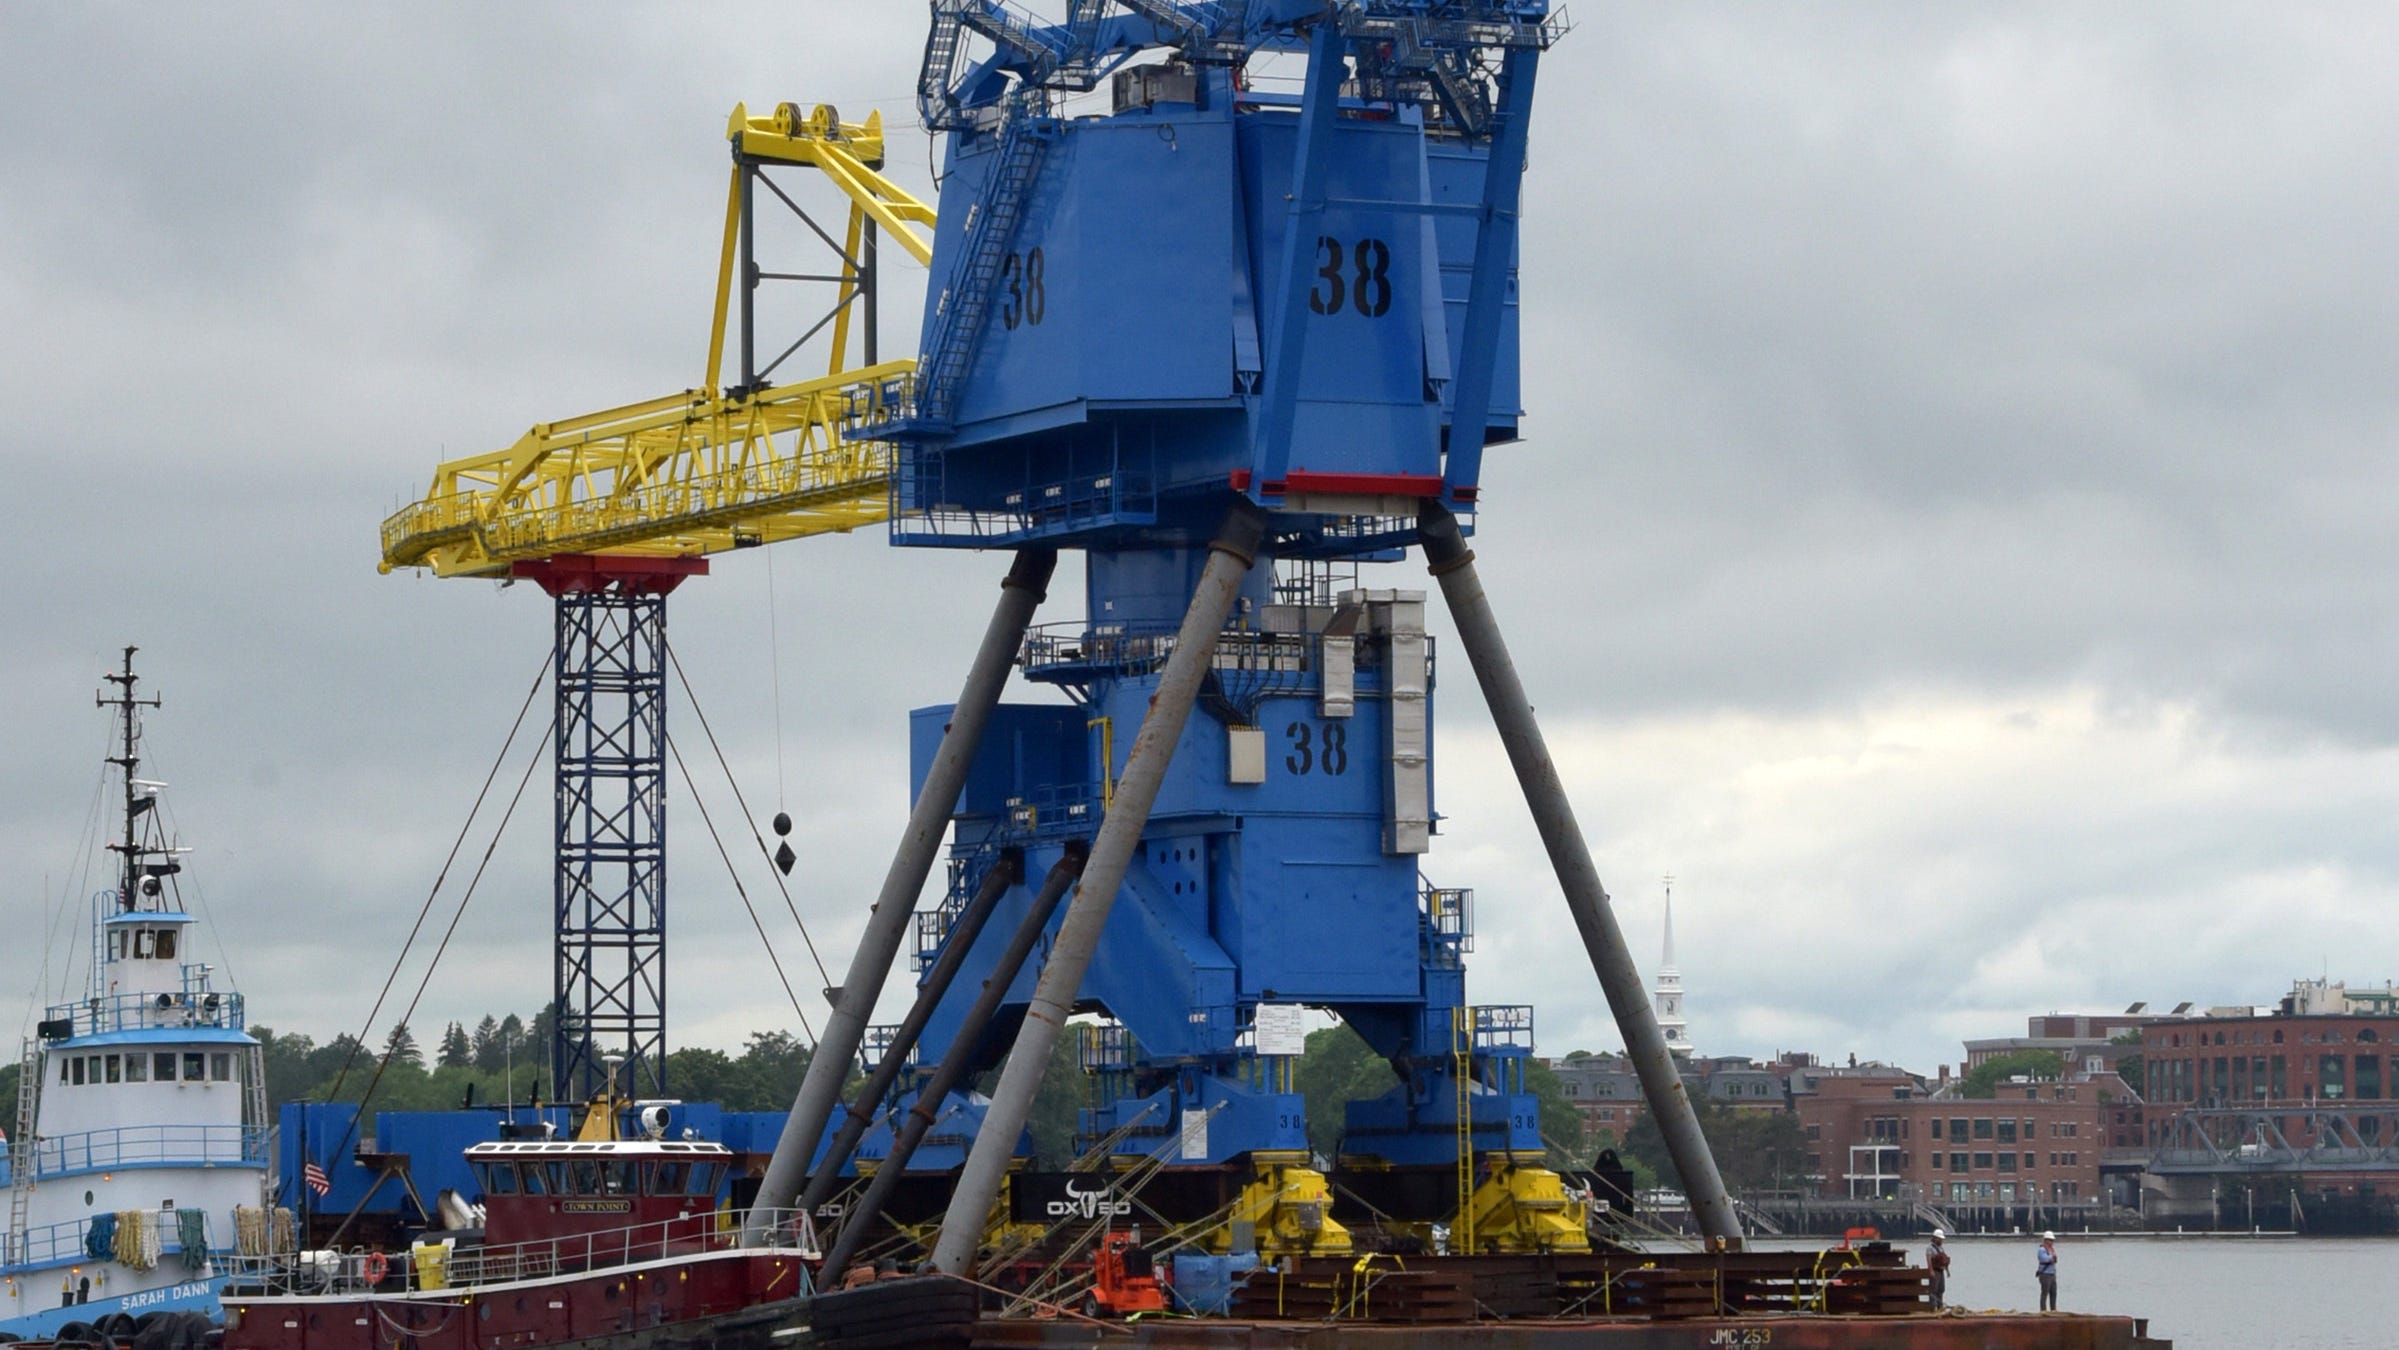 Blig the crane made in Manitowoc, arrives to U.S. Navy